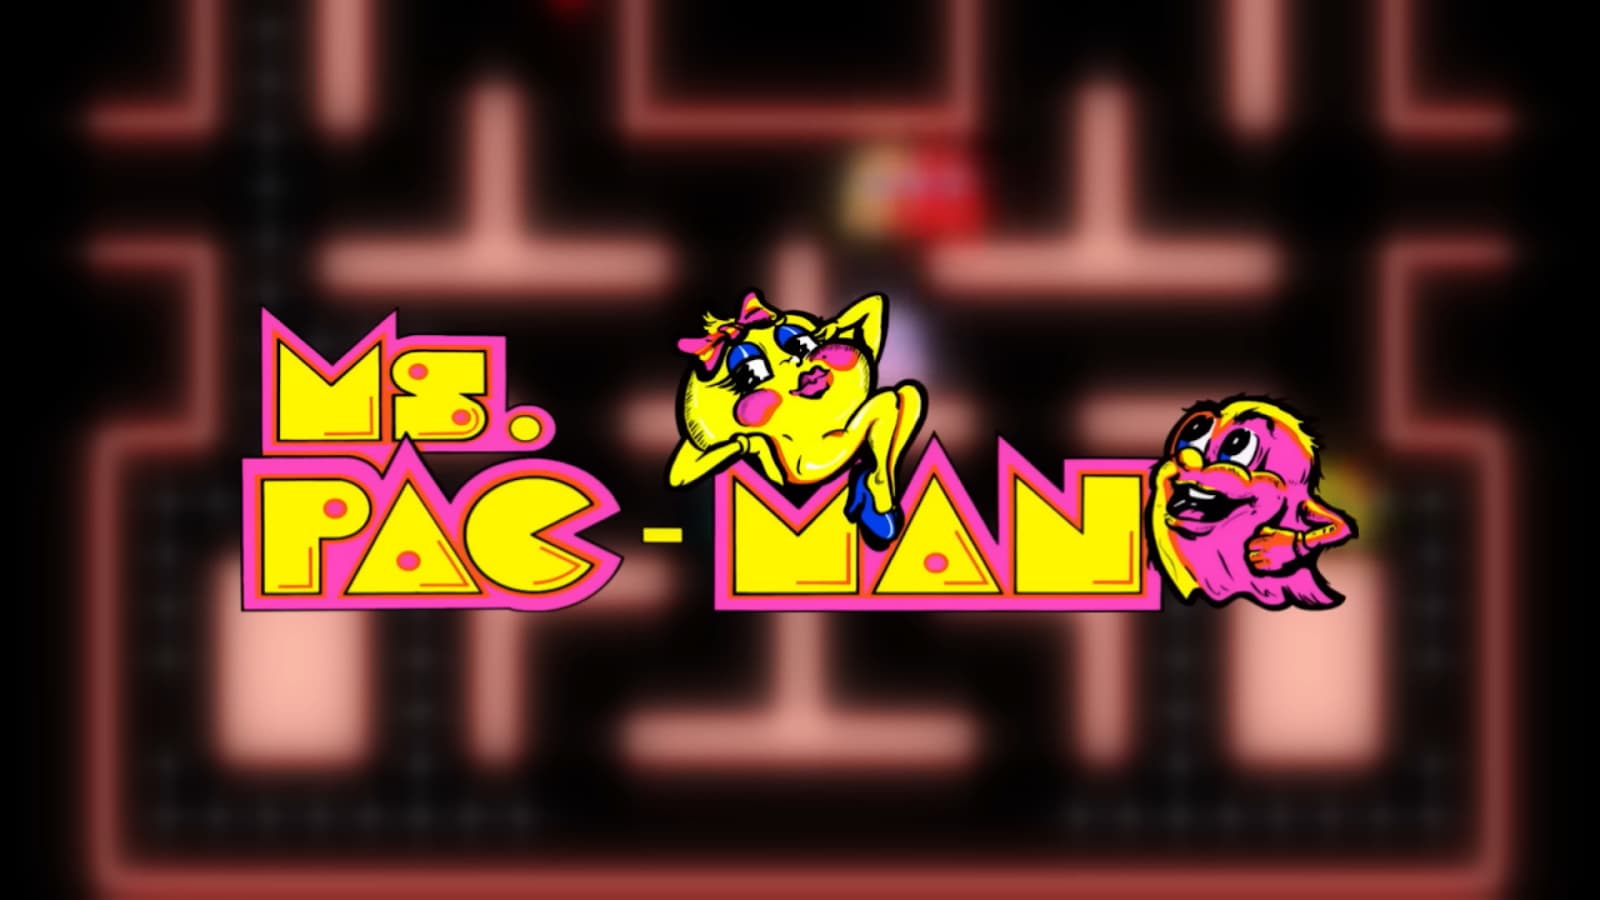 A vibrant title screen of "Ms. Pac-Man" with characters in a neon maze